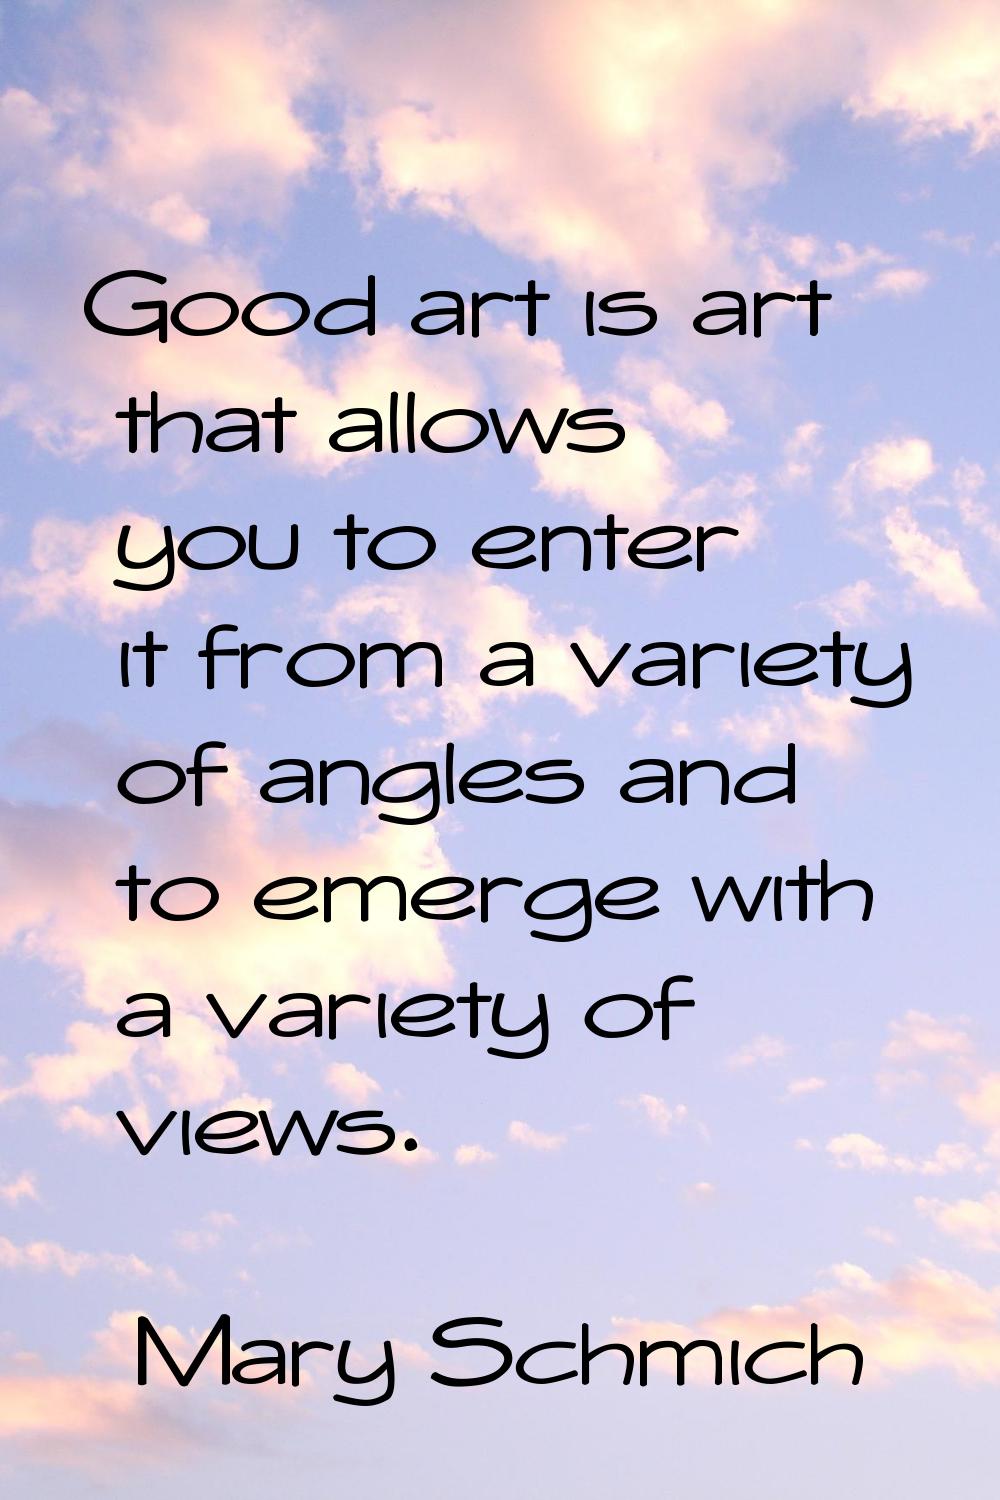 Good art is art that allows you to enter it from a variety of angles and to emerge with a variety o